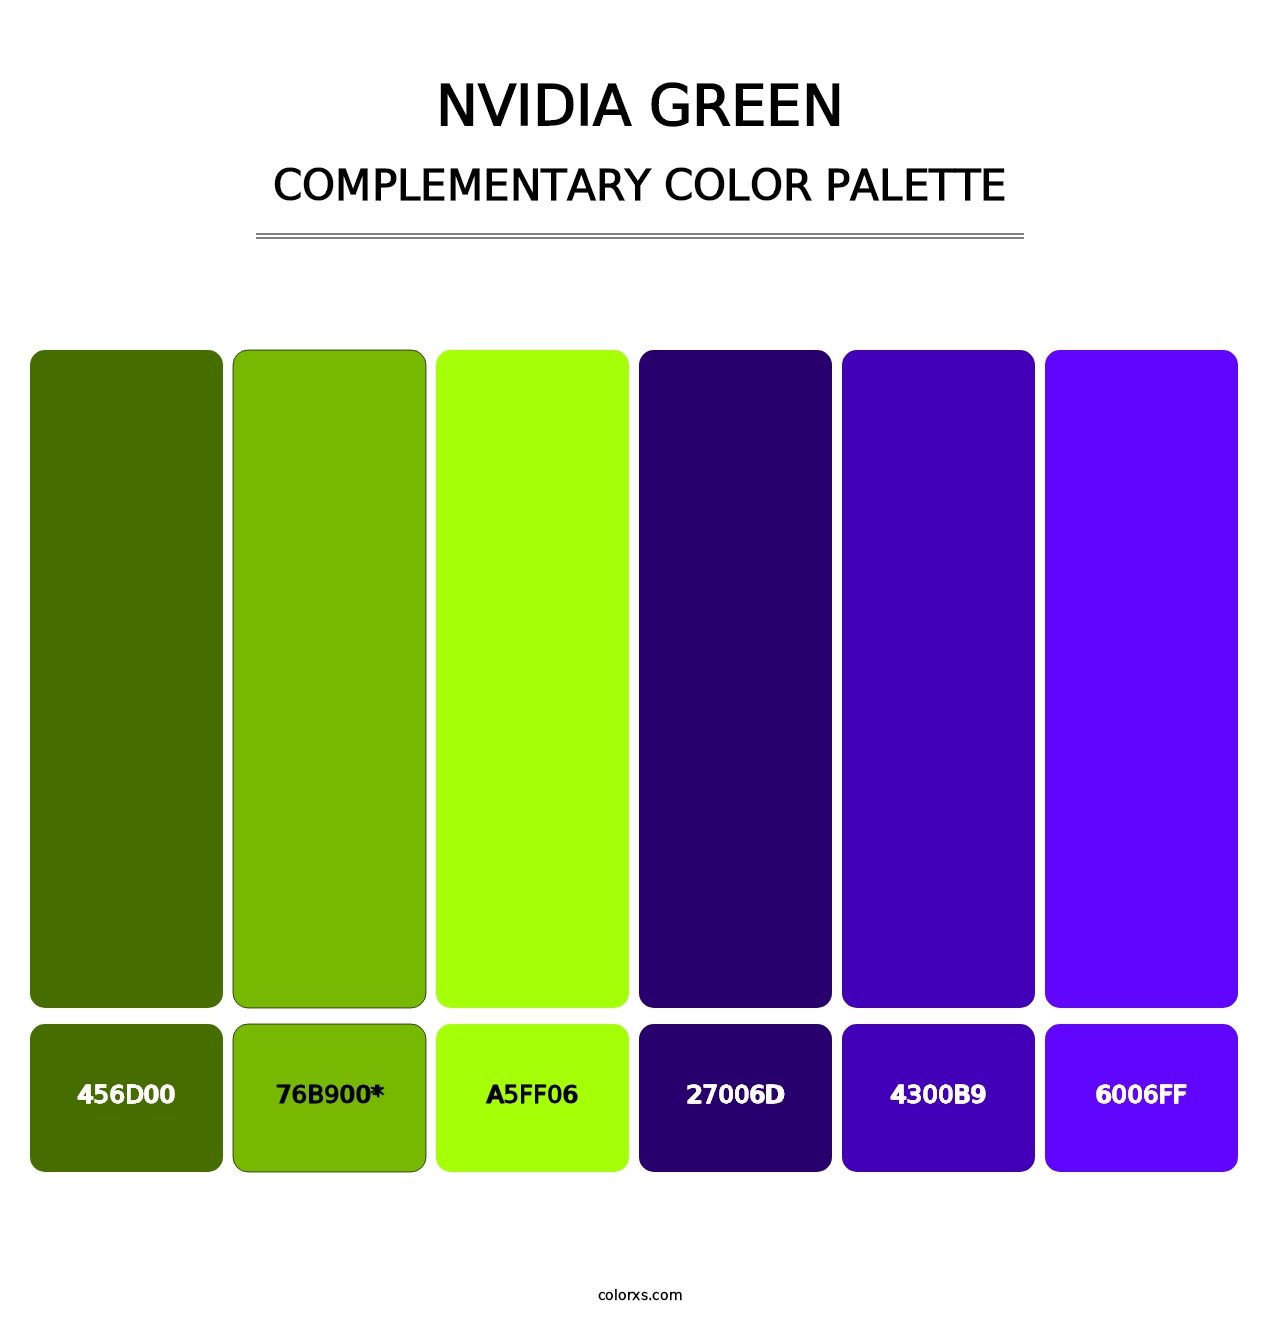 Nvidia Green - Complementary Color Palette